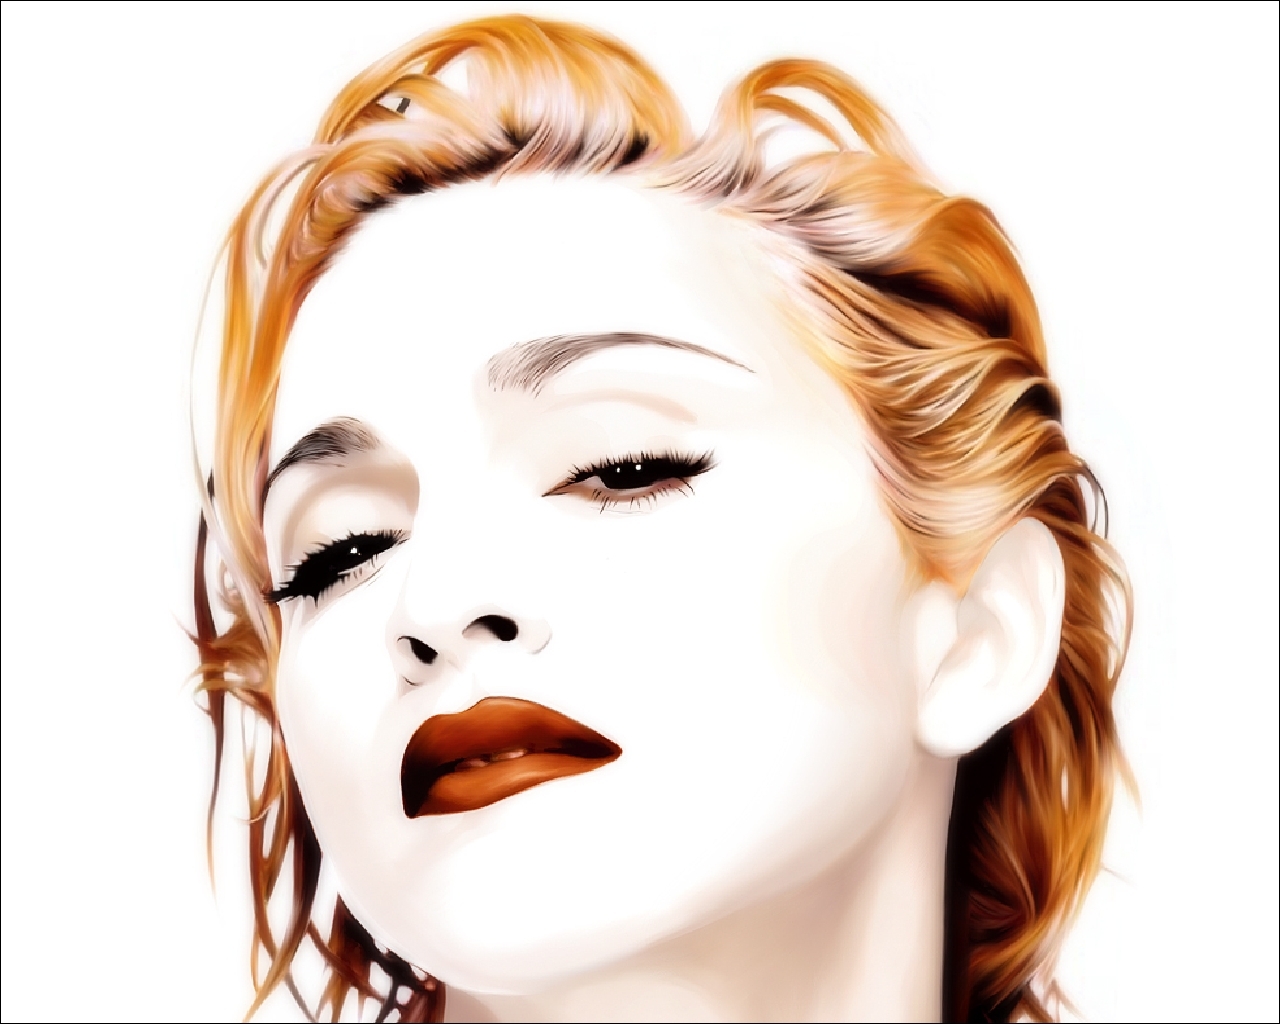 Madonna Picture